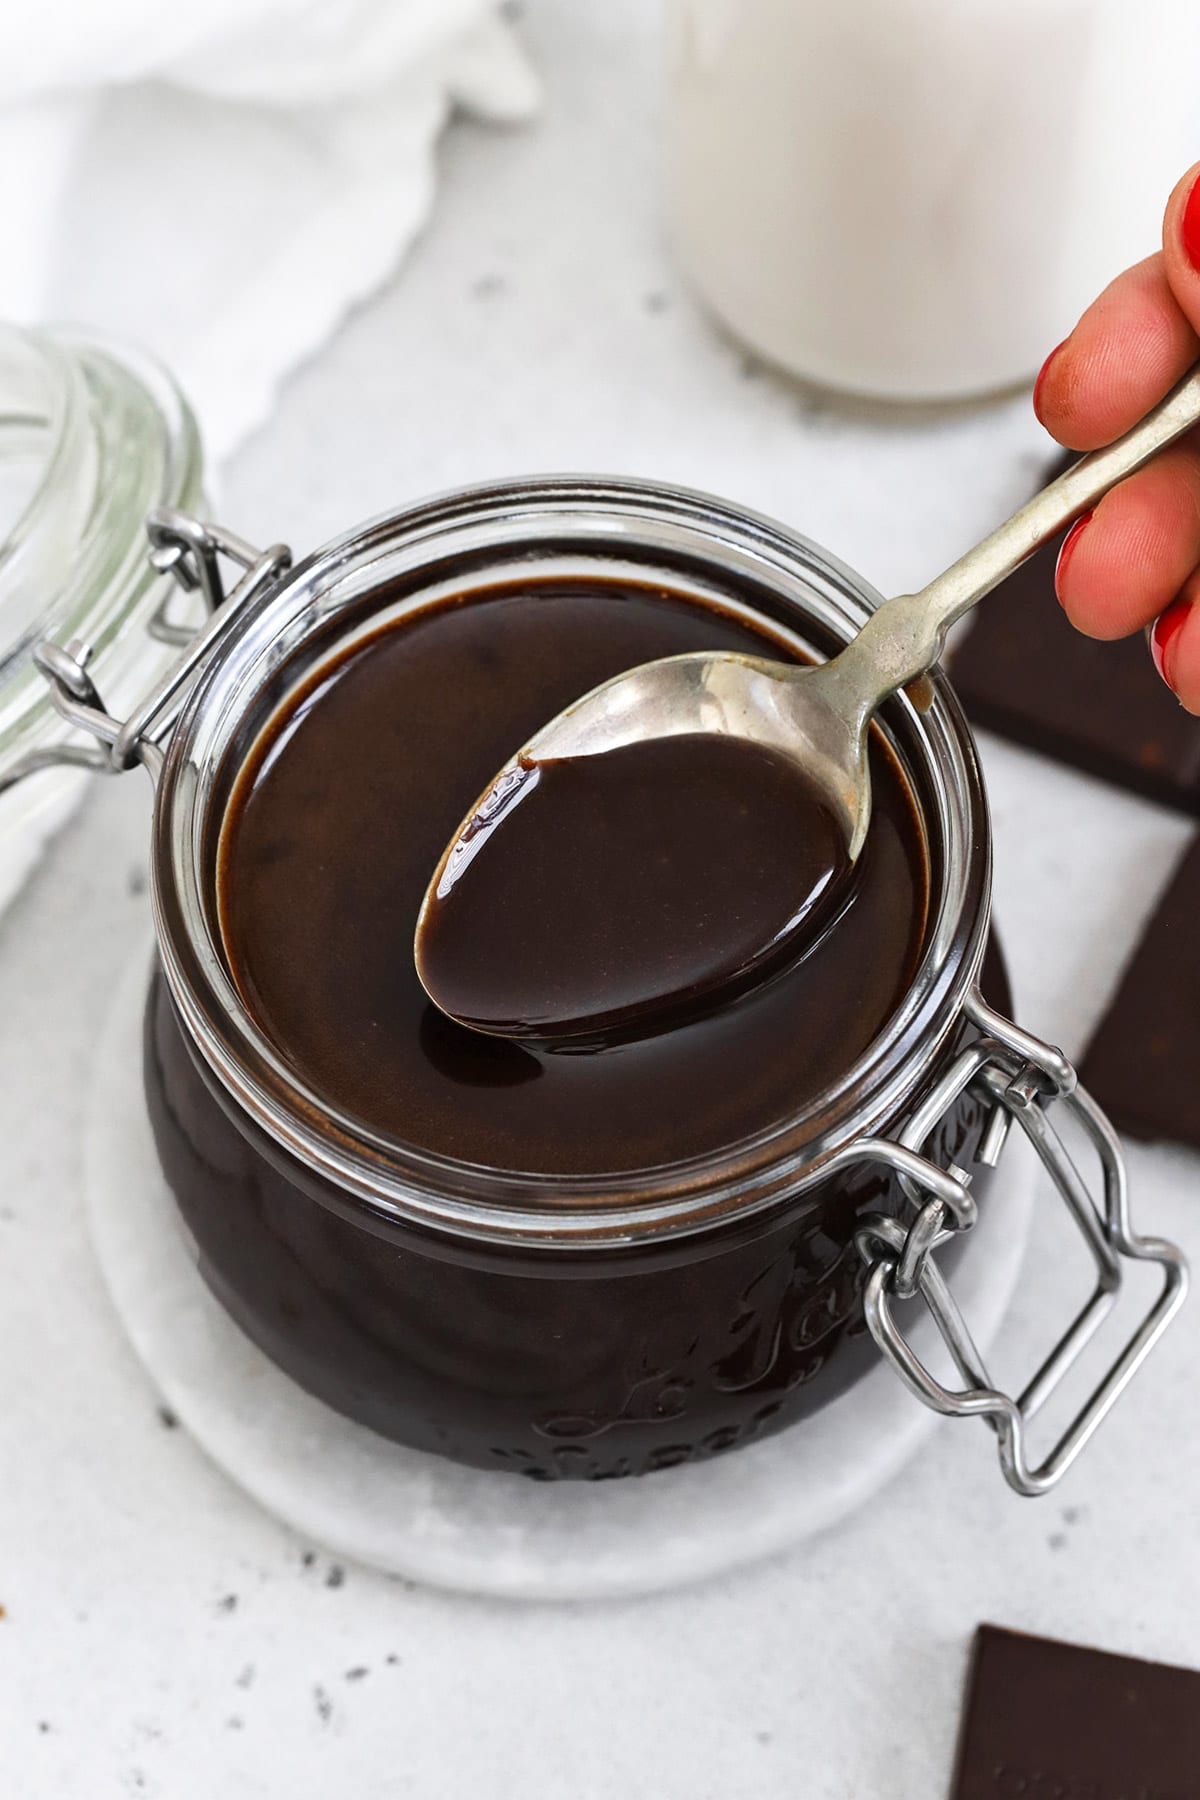 Dipping a spoon into a jar of homemade chocolate syrup